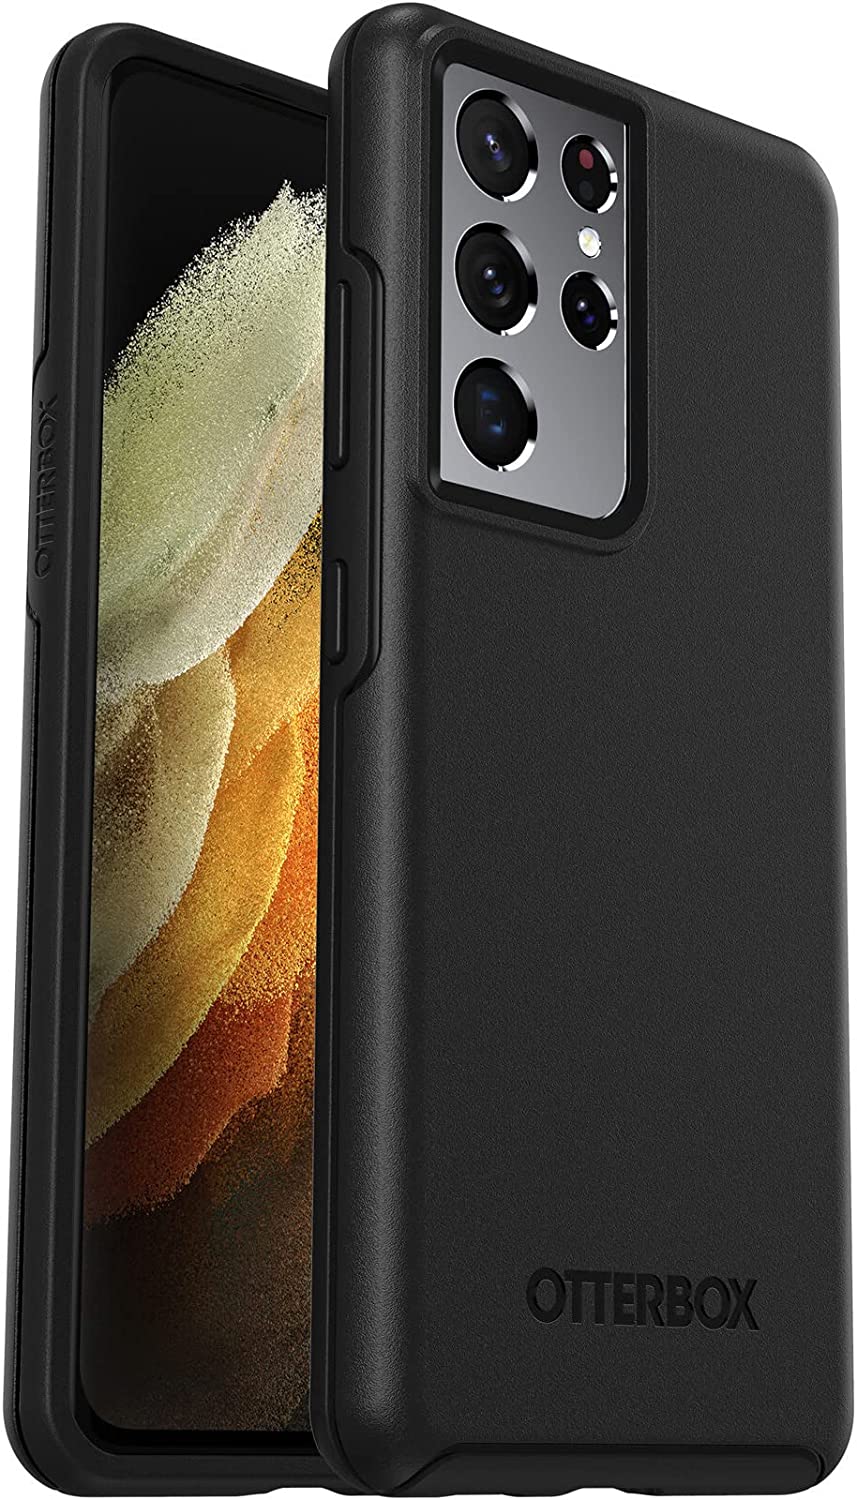 OtterBox SYMMETRY SERIES Case for Samsung Galaxy S21 Ultra 5G - Black (Certified Refurbished)